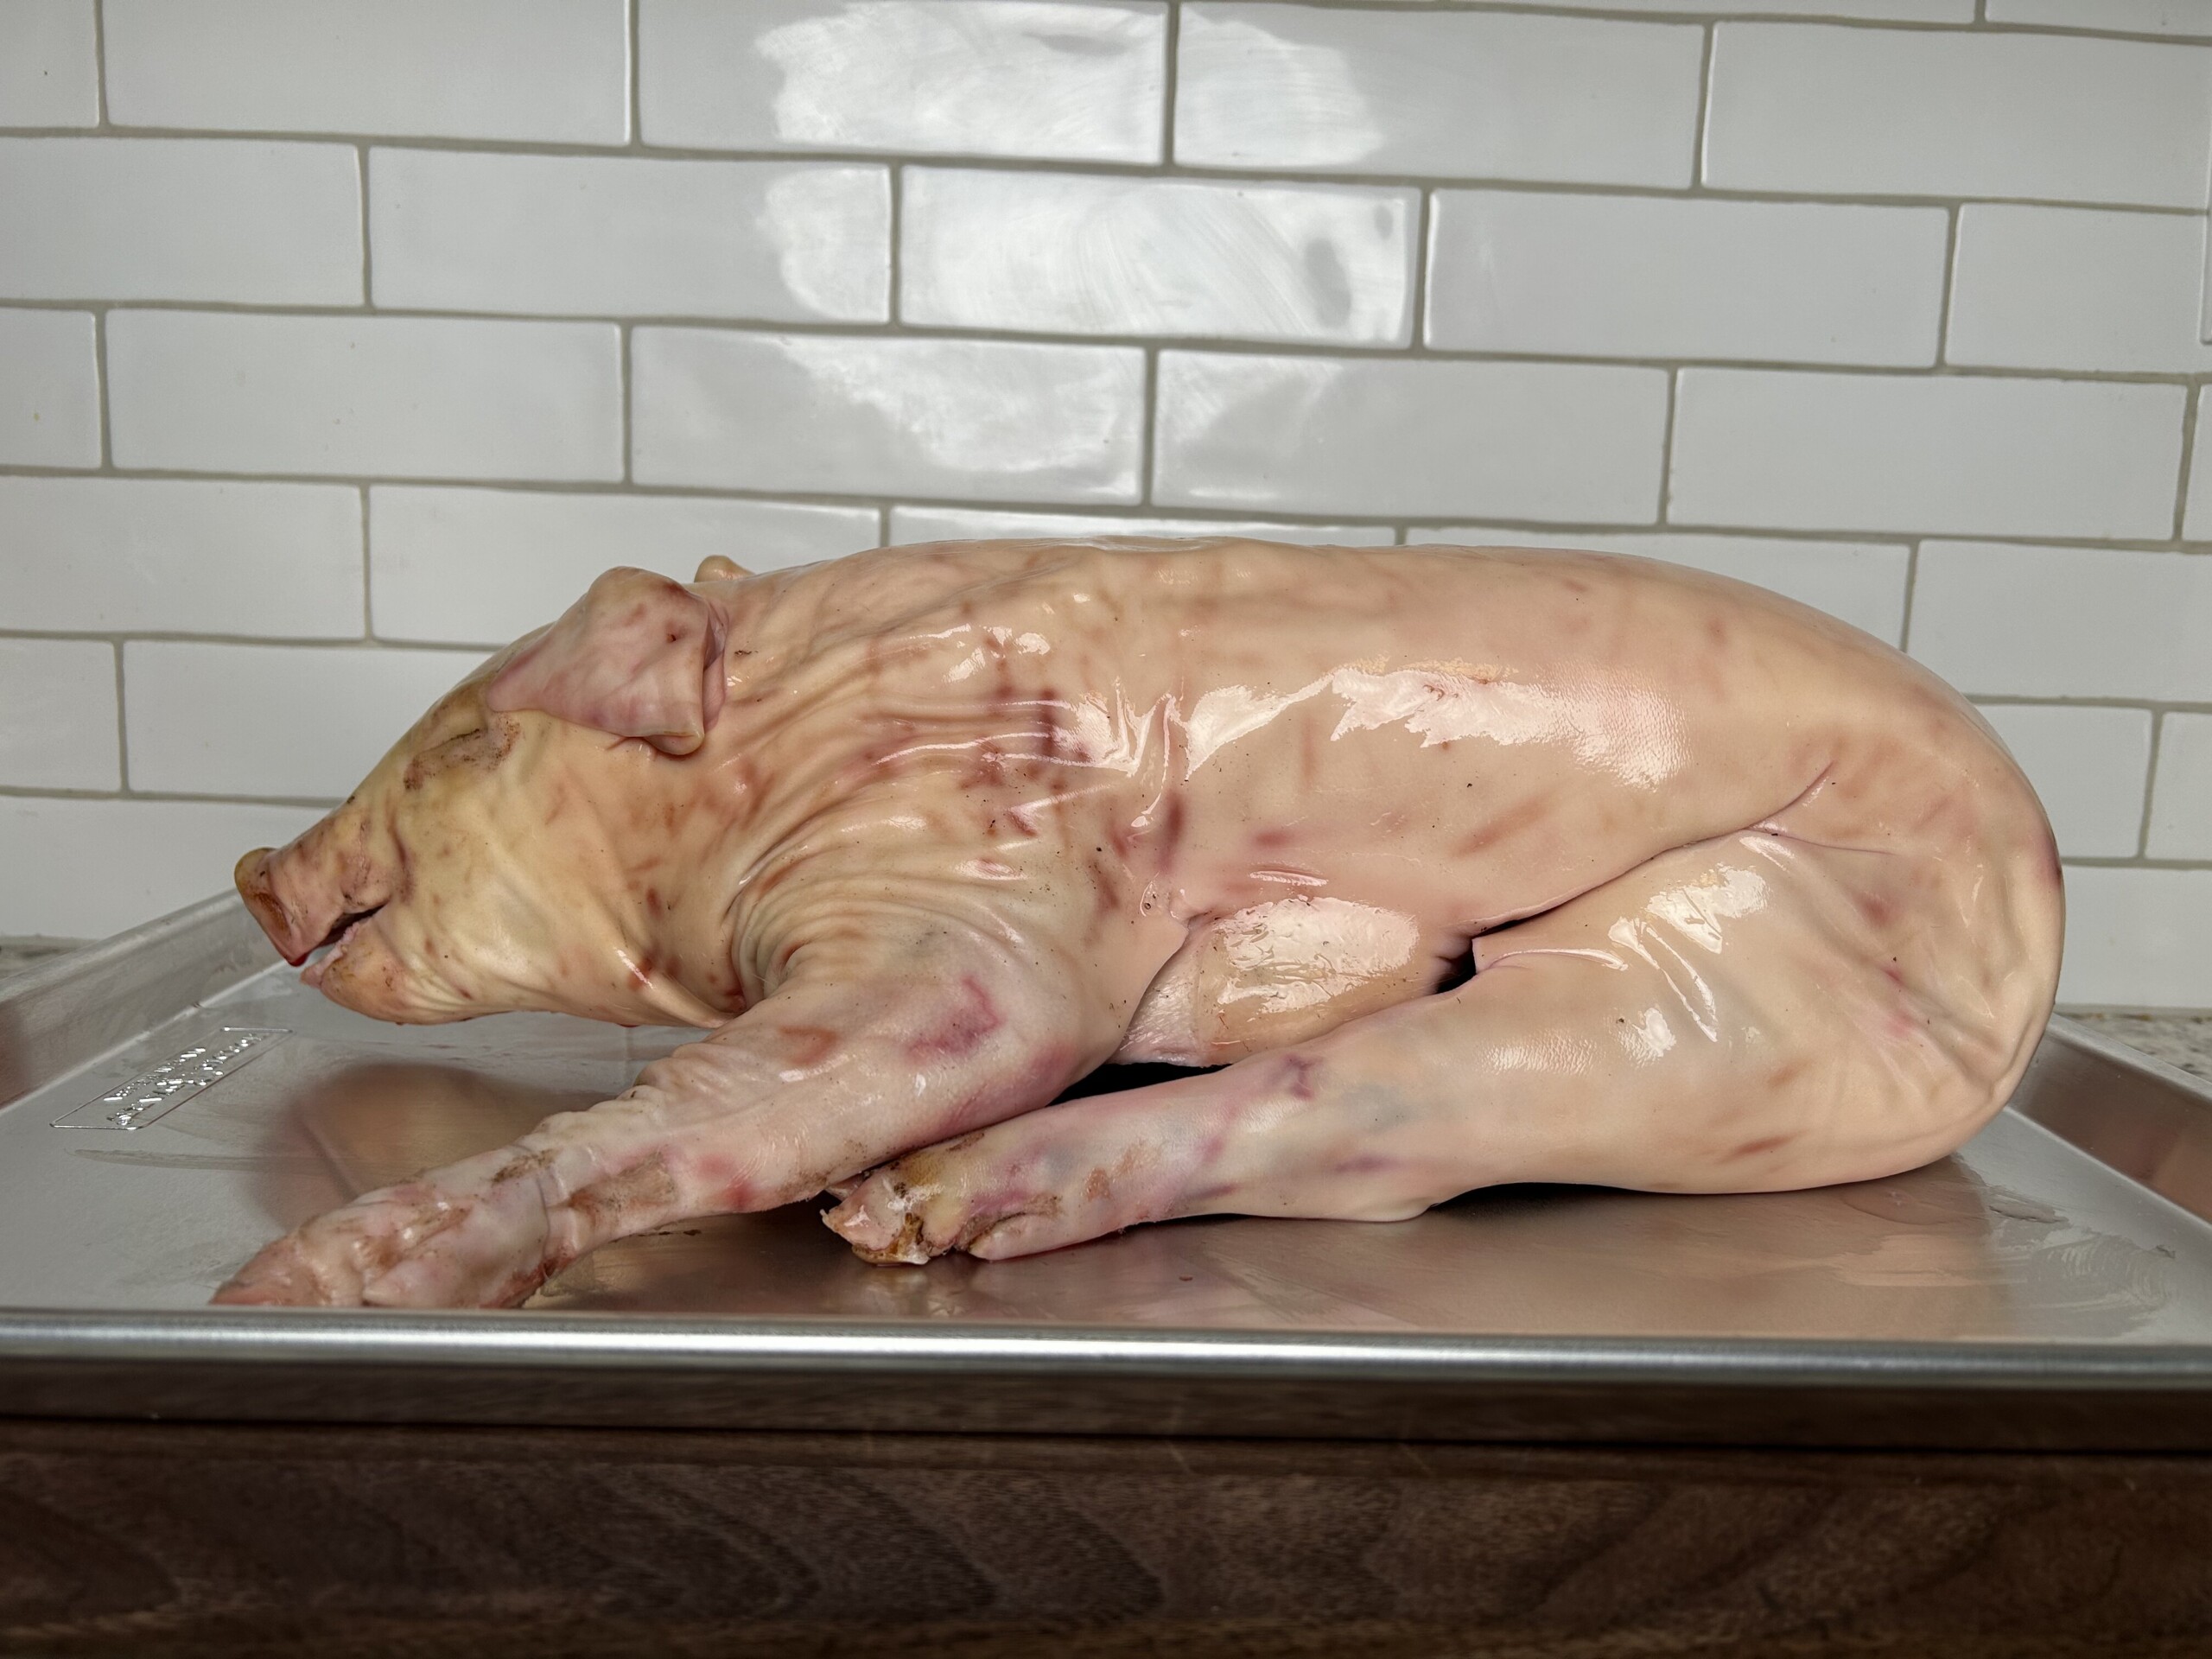 raw suckling pig on a metal tray